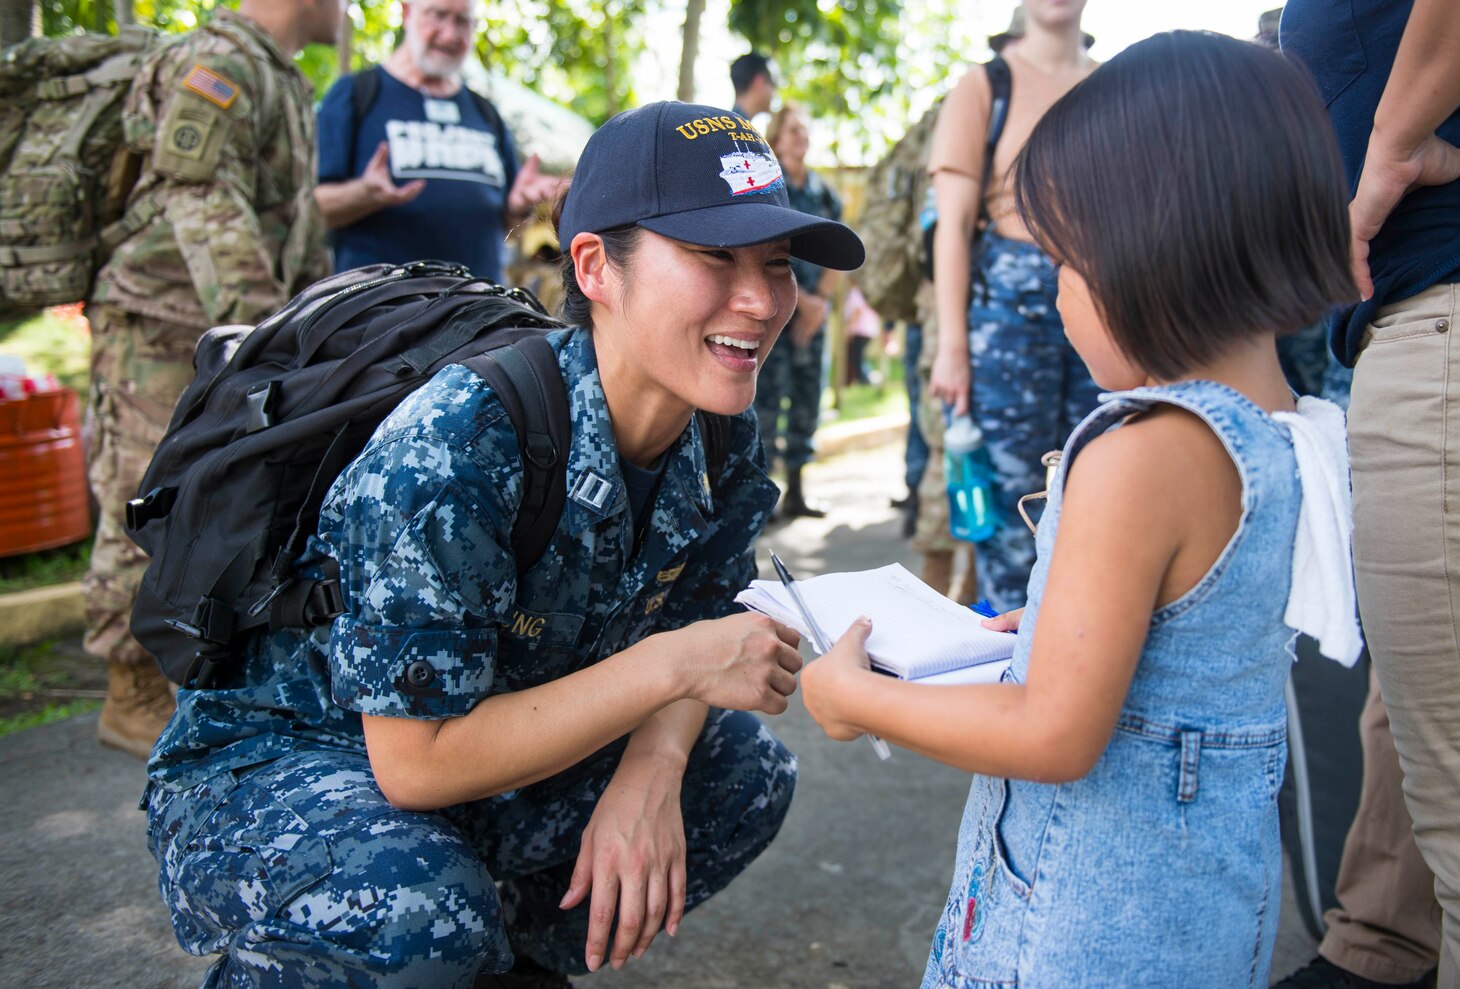 LIGAO CITY, Philippines (June 28, 2016) - Lt. Gabrielle Jung, a Navy dentist and native of Aurora, Colorado (left), talks with a student at Ligao West Central Elementary School during Pacific Partnership 2016. Jung was at the school as part of a cooperative health engagement where Pacific Partnership 2016 personnel attached to hospital ship USNS Mercy (T-AH 19) and members of the Armed Forces of the Philippines spent the day educating people on health care, hygiene and nutrition. Participants also provided direct care services including optometry, dental care and physical therapy. Pacific Partnership is visiting the Philippines for the seventh time since its first mission in 2006. Partner nations will work side-by-side with local military and non-government organizations to conduct cooperative health engagements, community relation events and subject matter expert exchanges to better prepare for a natural disaster or crisis. 